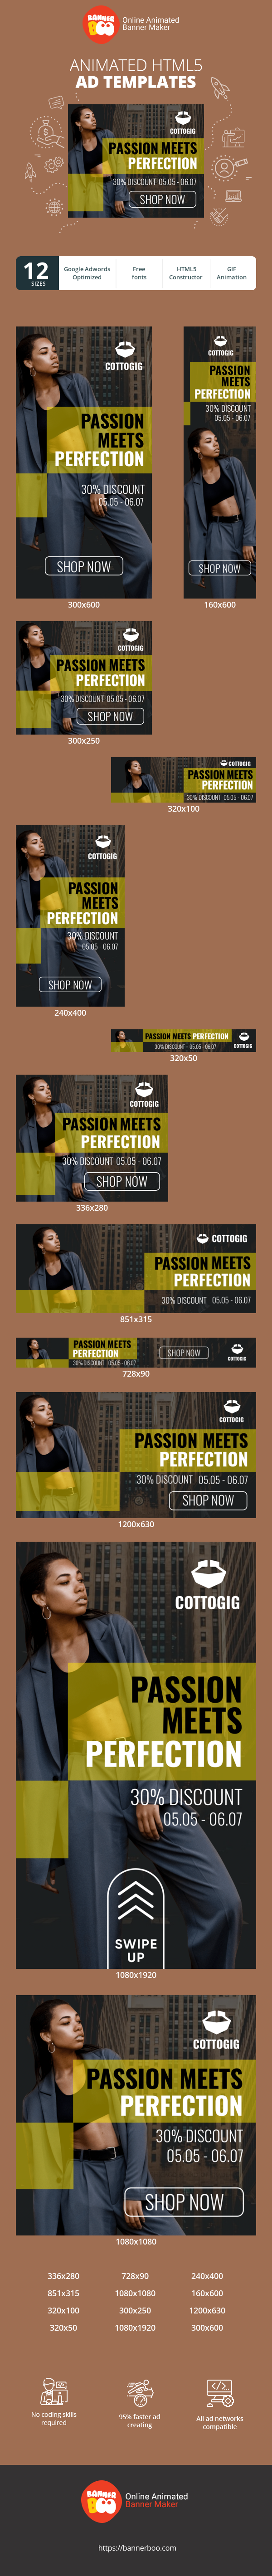 Banner ad template — Passion Meet Perfection — 30% Discount